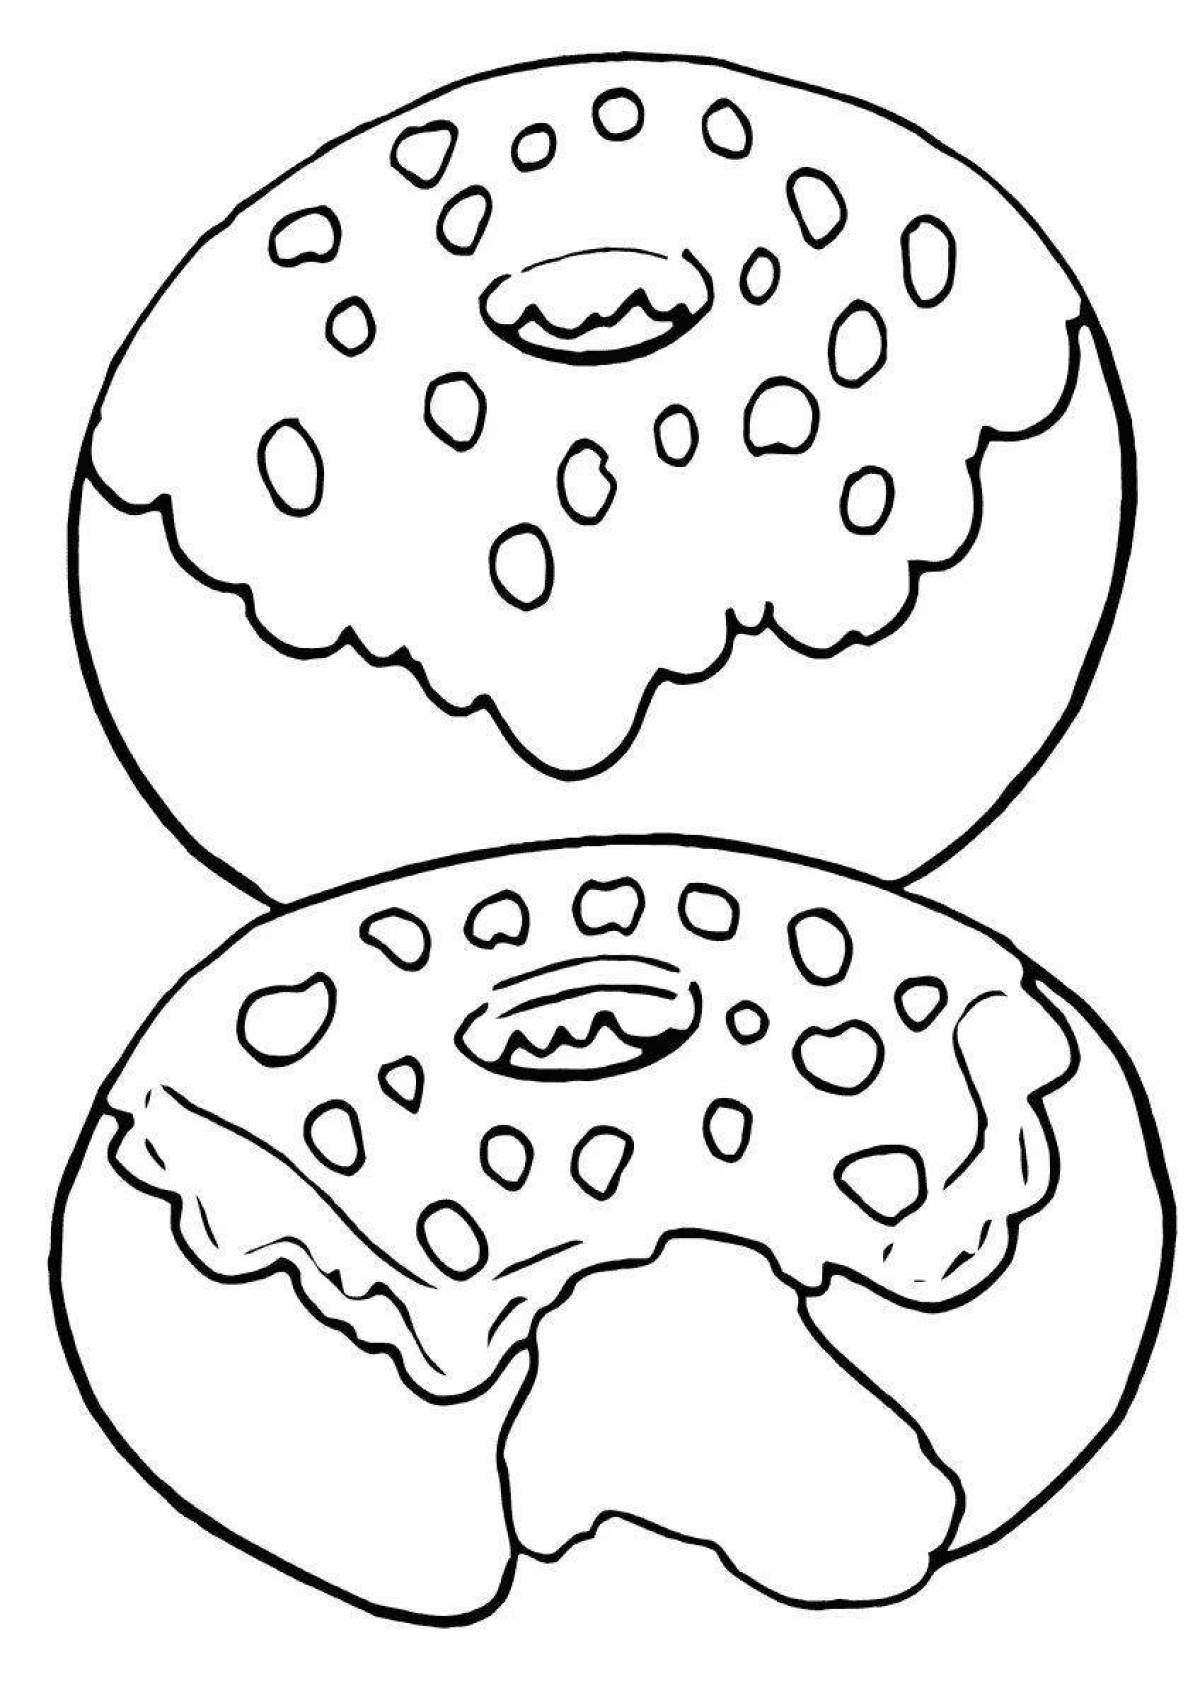 Fabulous donuts coloring book for kids